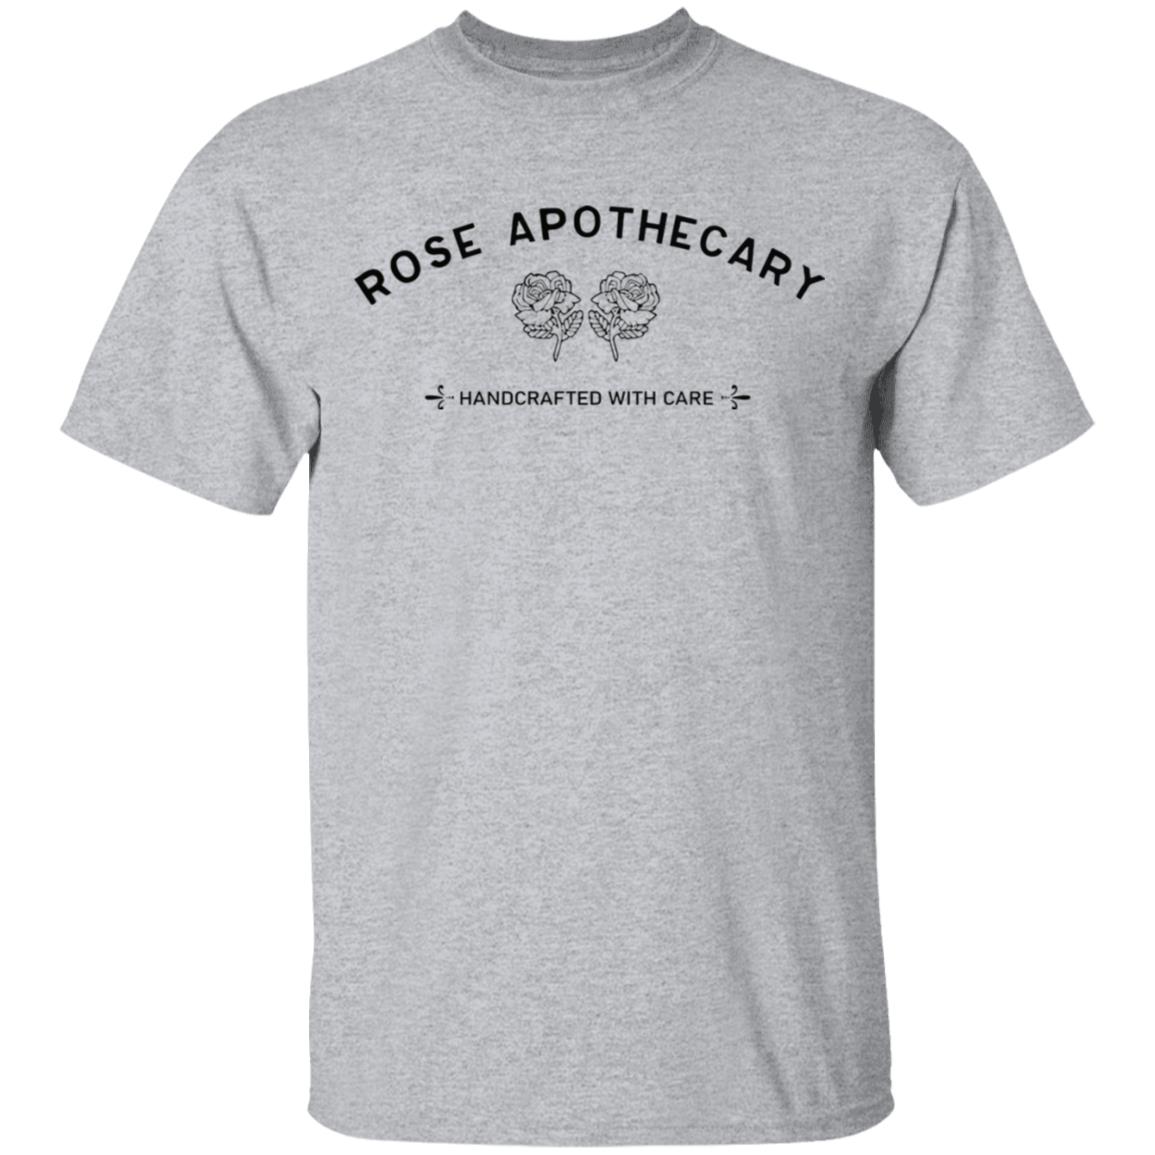 Rose Apothecary Handcrafted With Care shirt